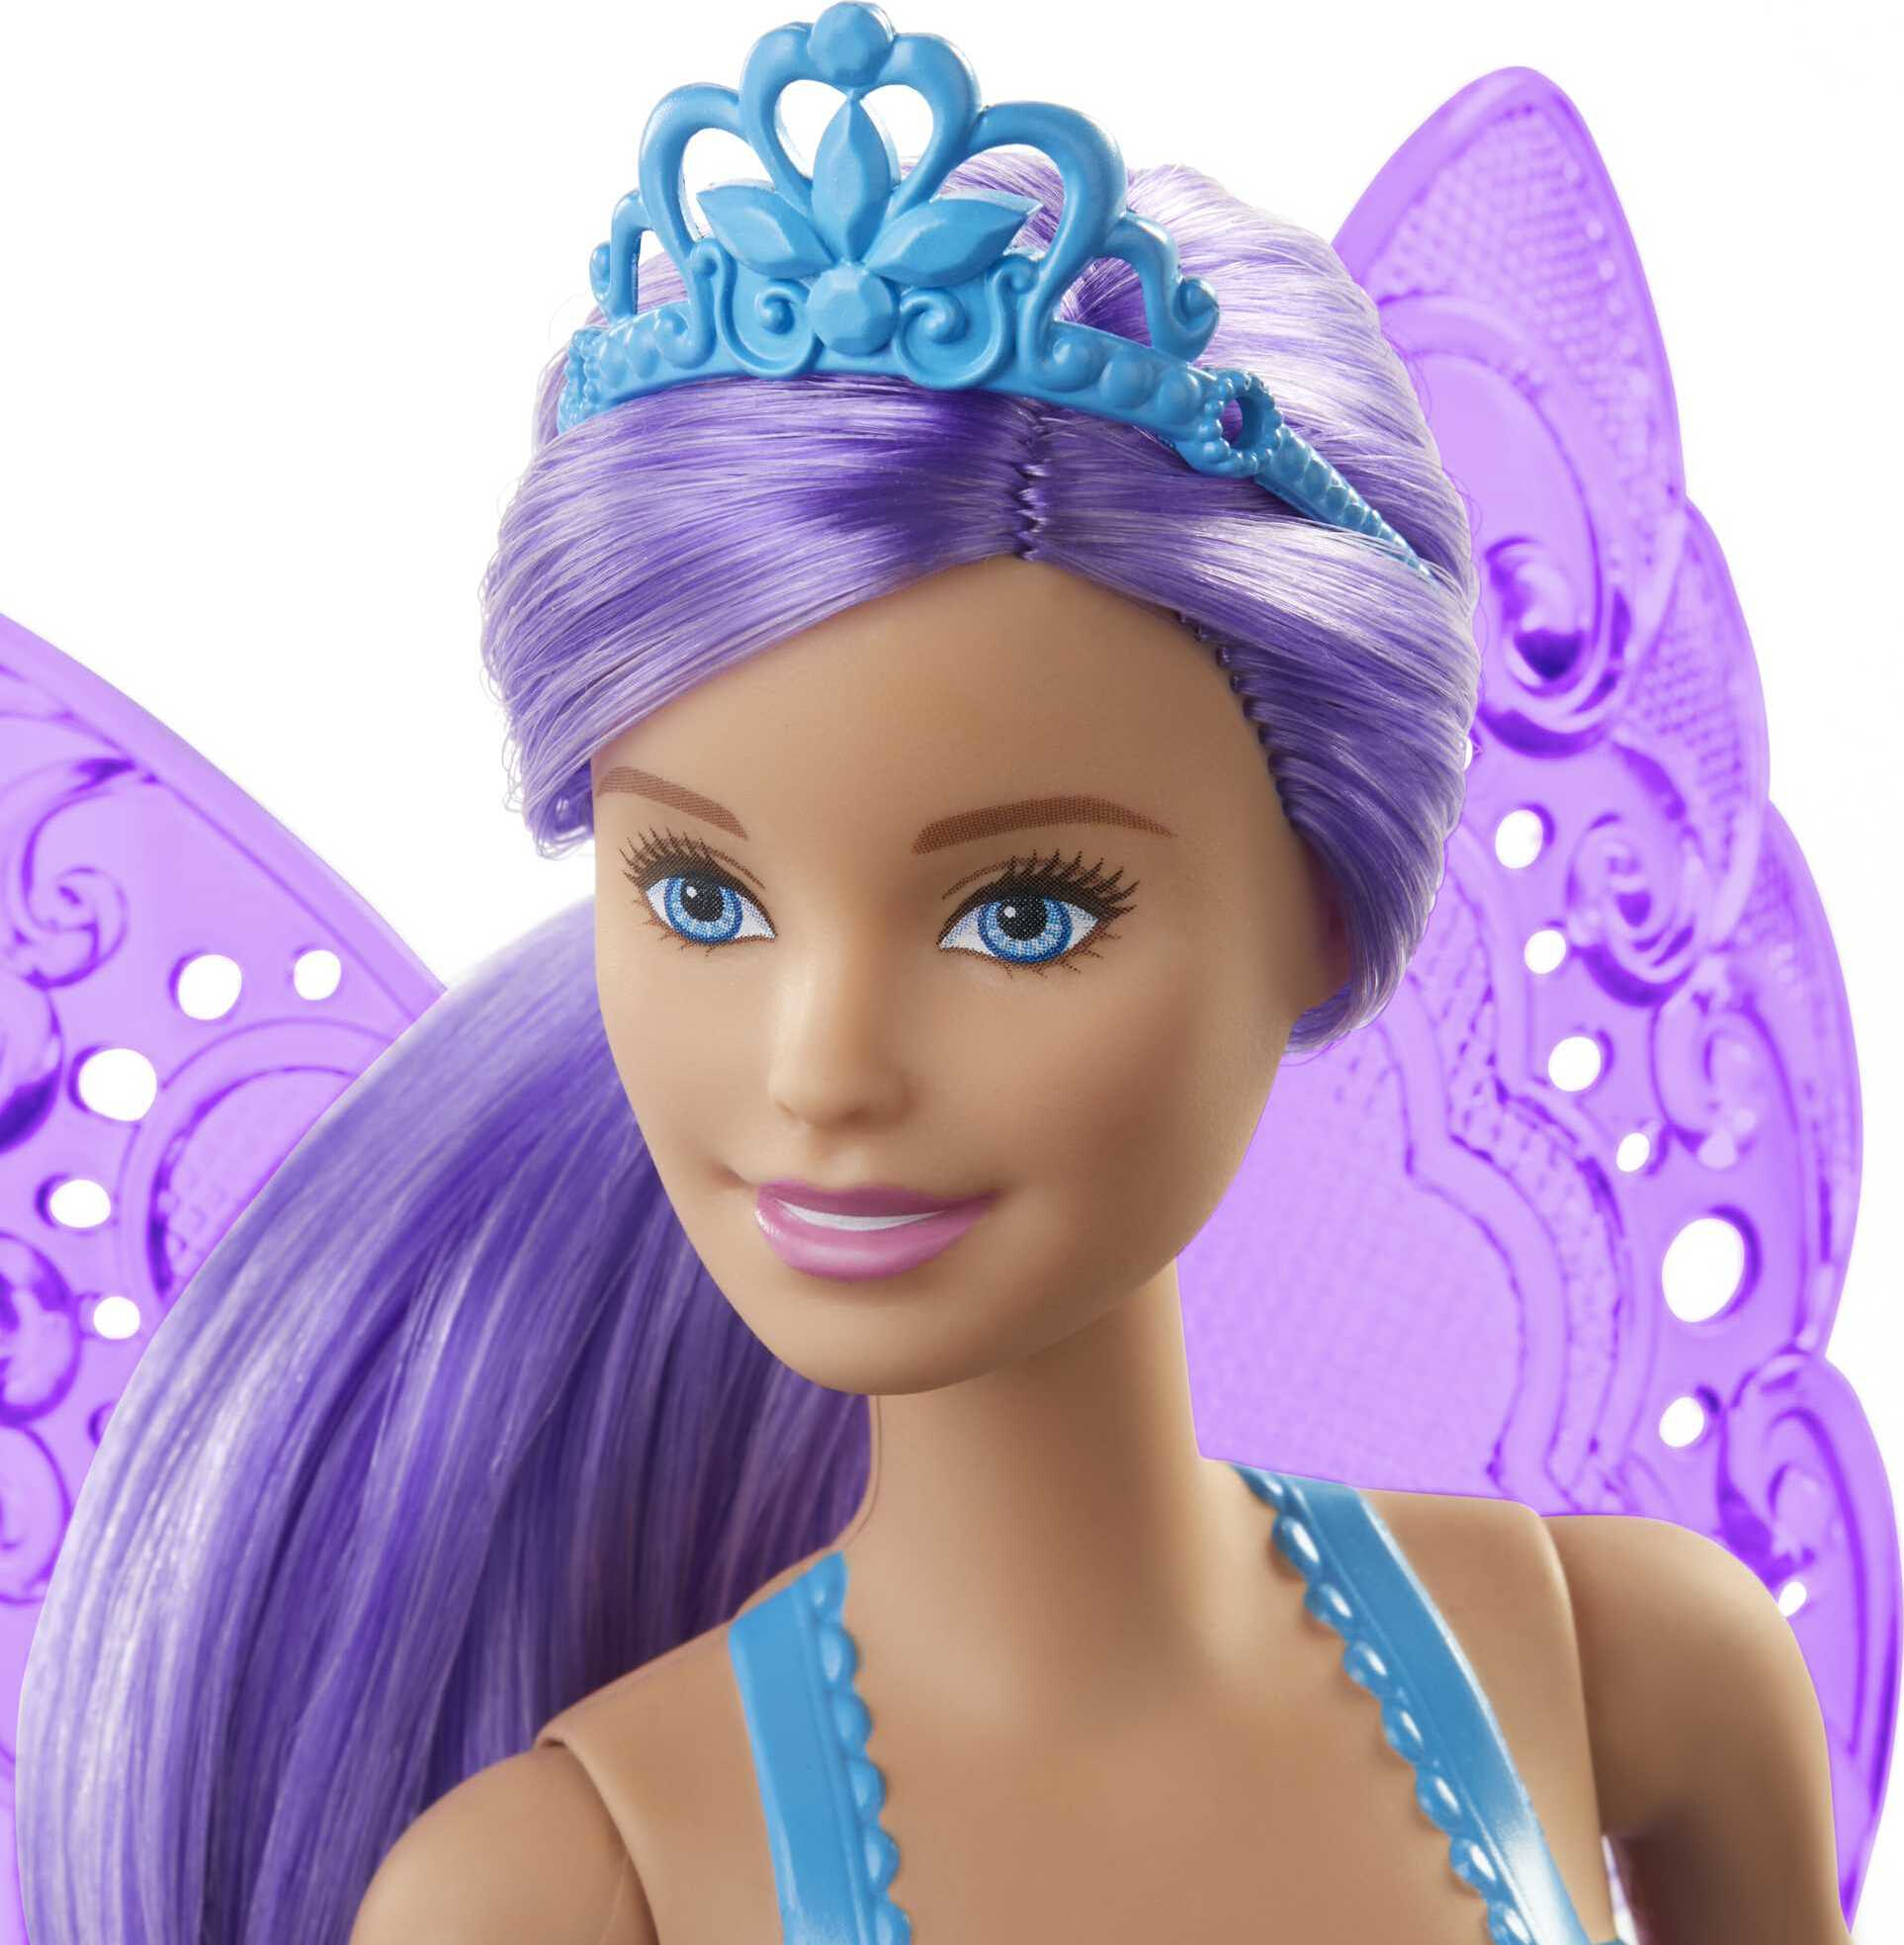 Barbie Dreamtopia Fairy Doll with Purple Hair, Removable Wings & Tiara Accessory - image 3 of 6